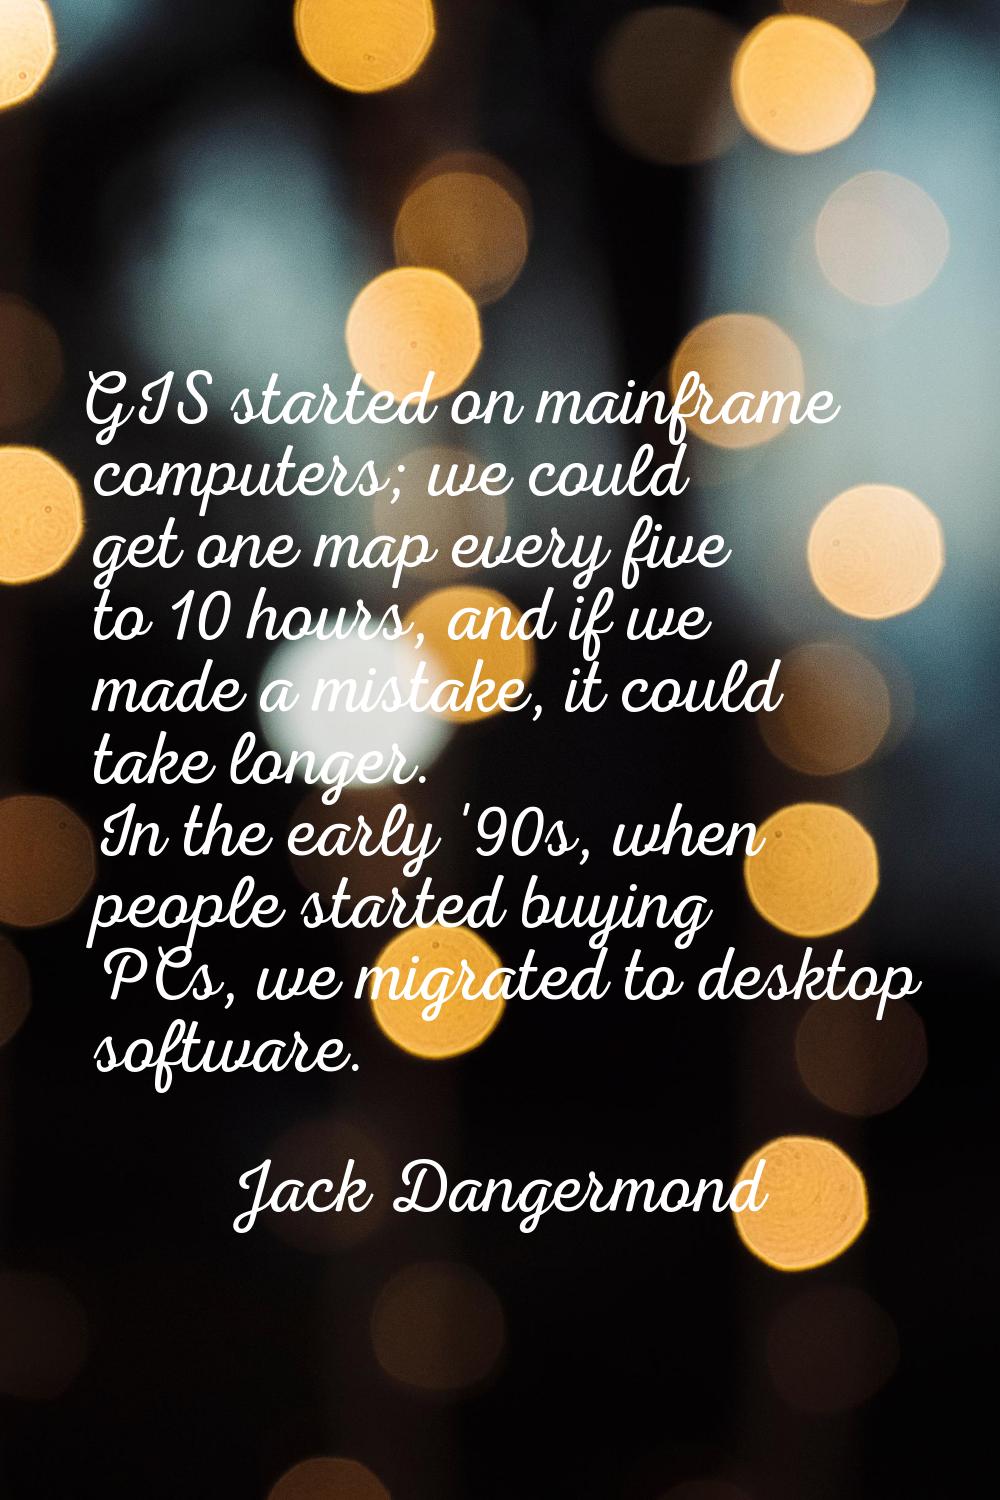 GIS started on mainframe computers; we could get one map every five to 10 hours, and if we made a m